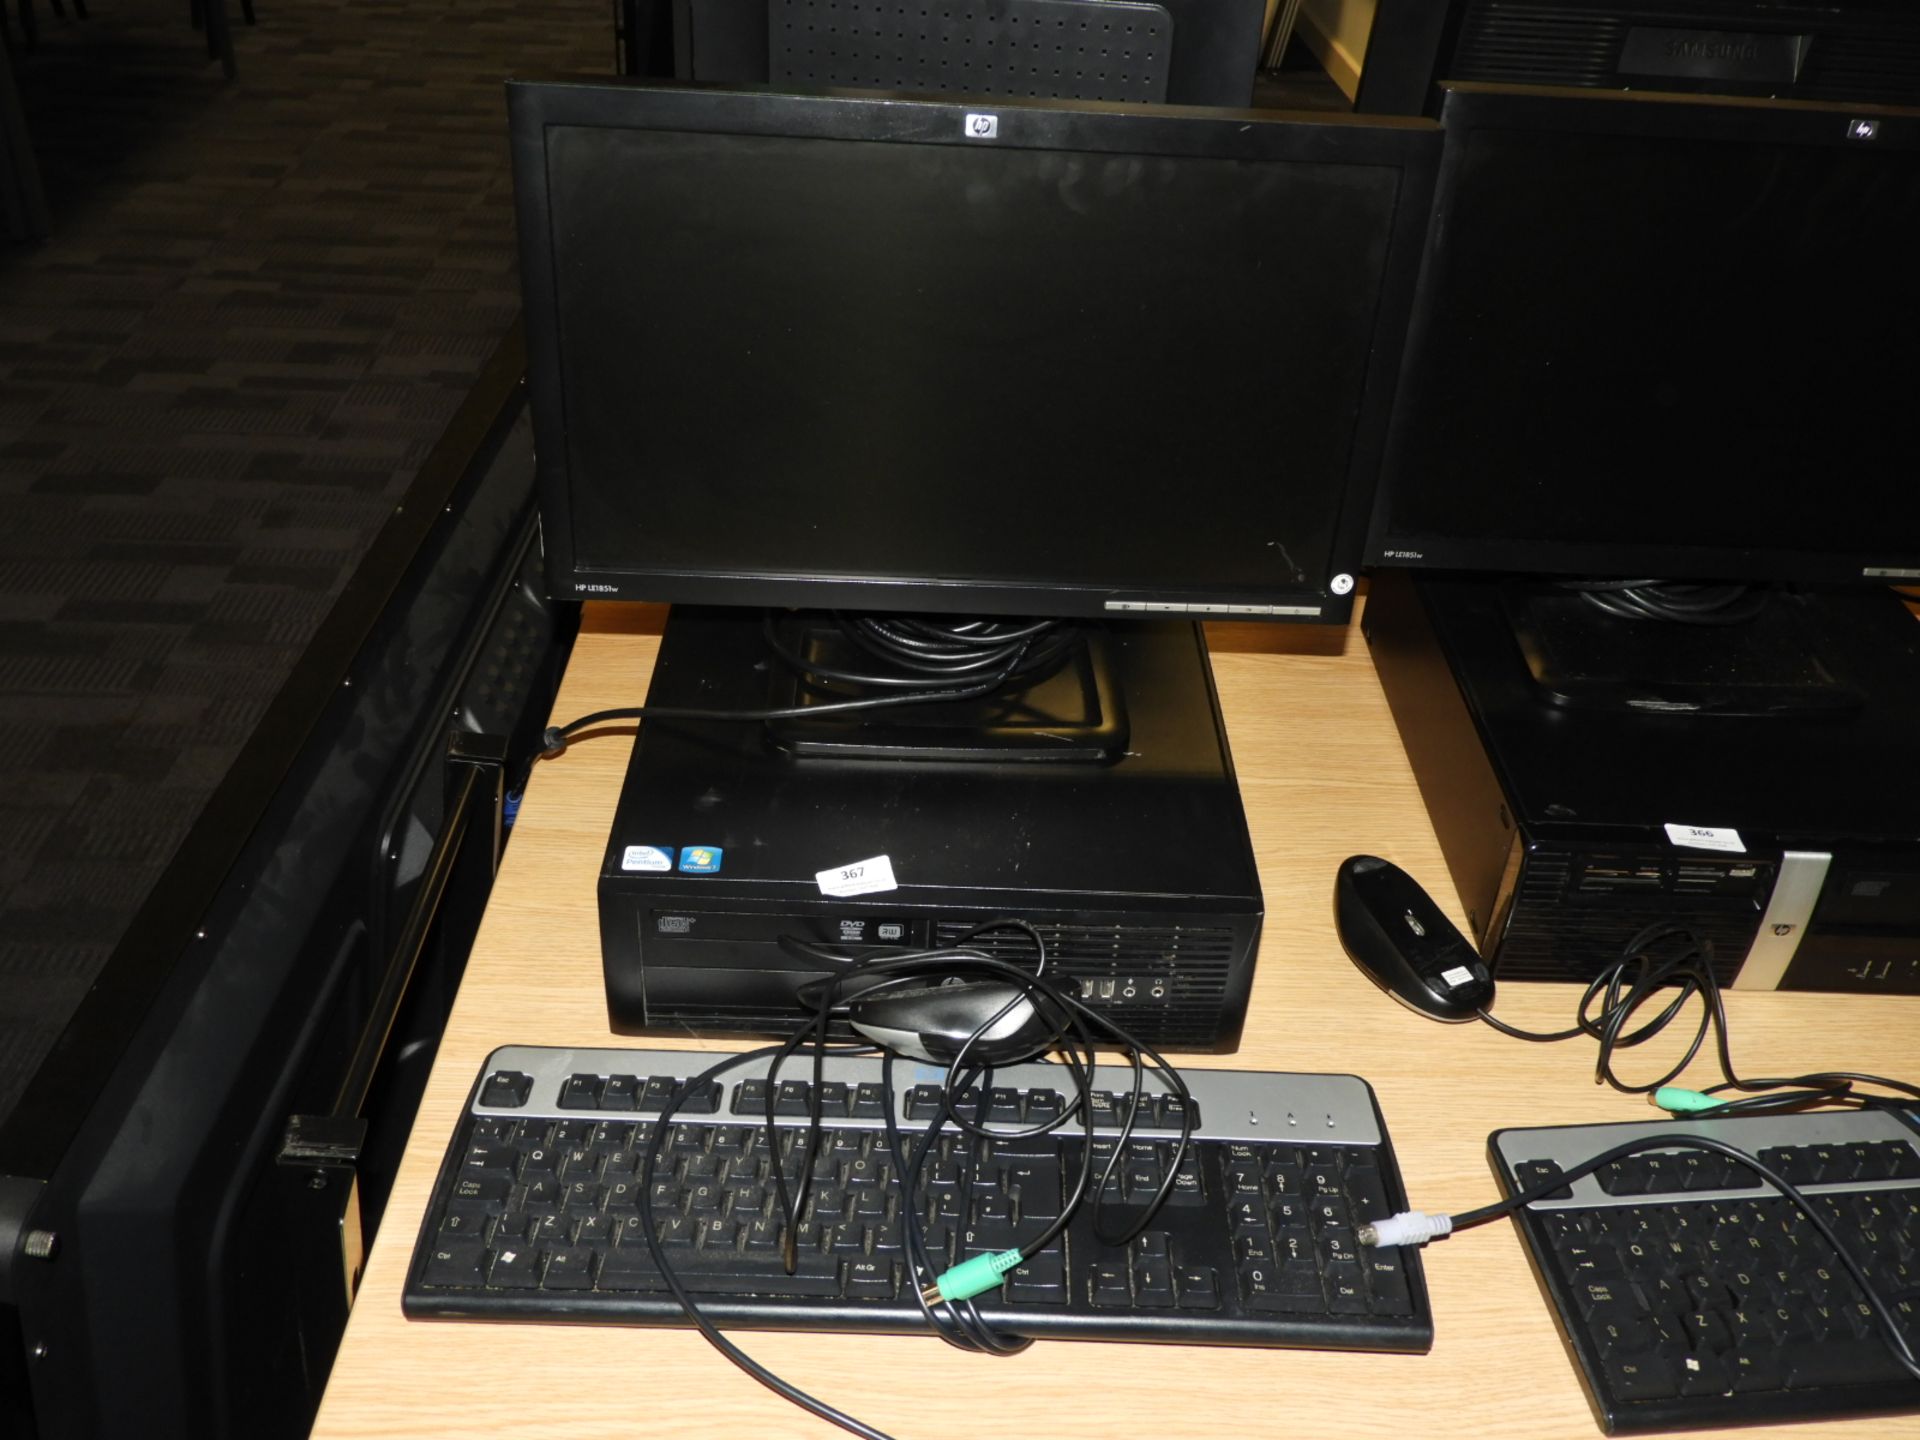 *HP Desktop Computer with Monitor, Keyboard and Mouse